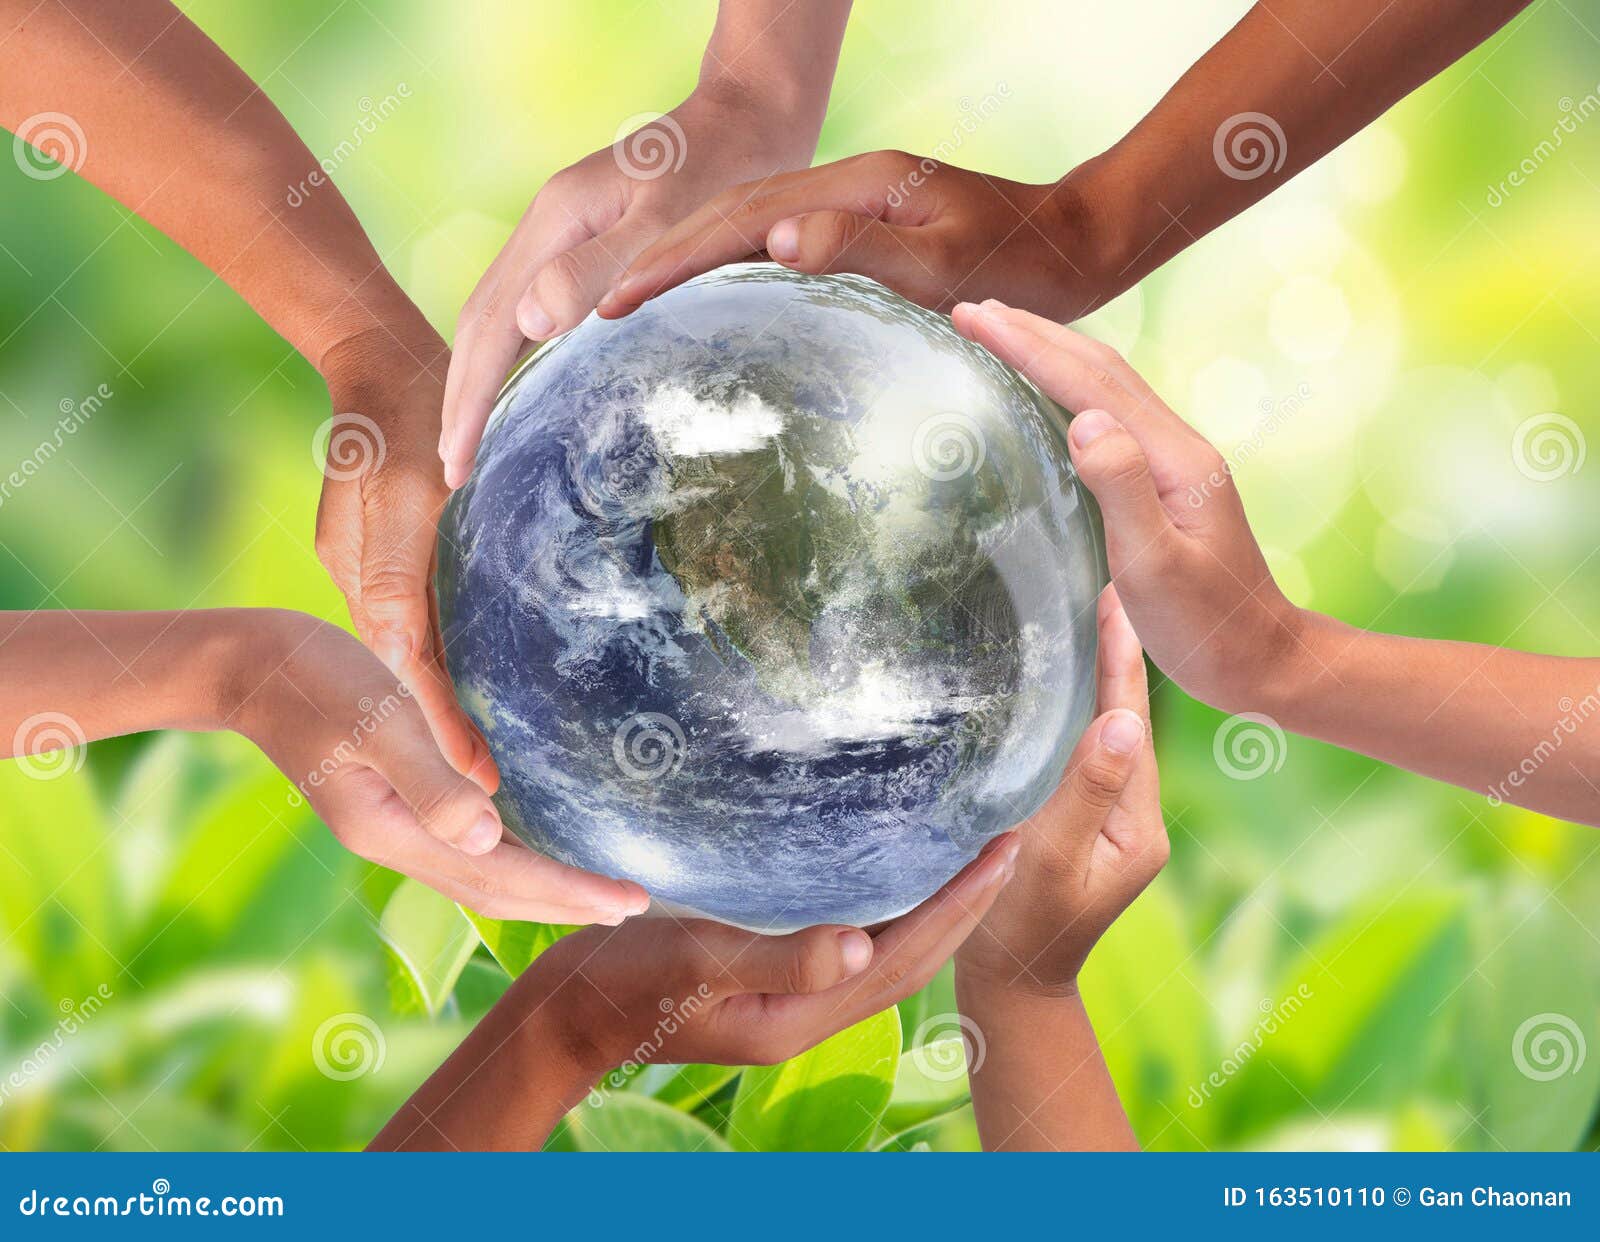 conceptual  of multiracial human hands surrounding the earth globe. unity, world peace, humanity concept